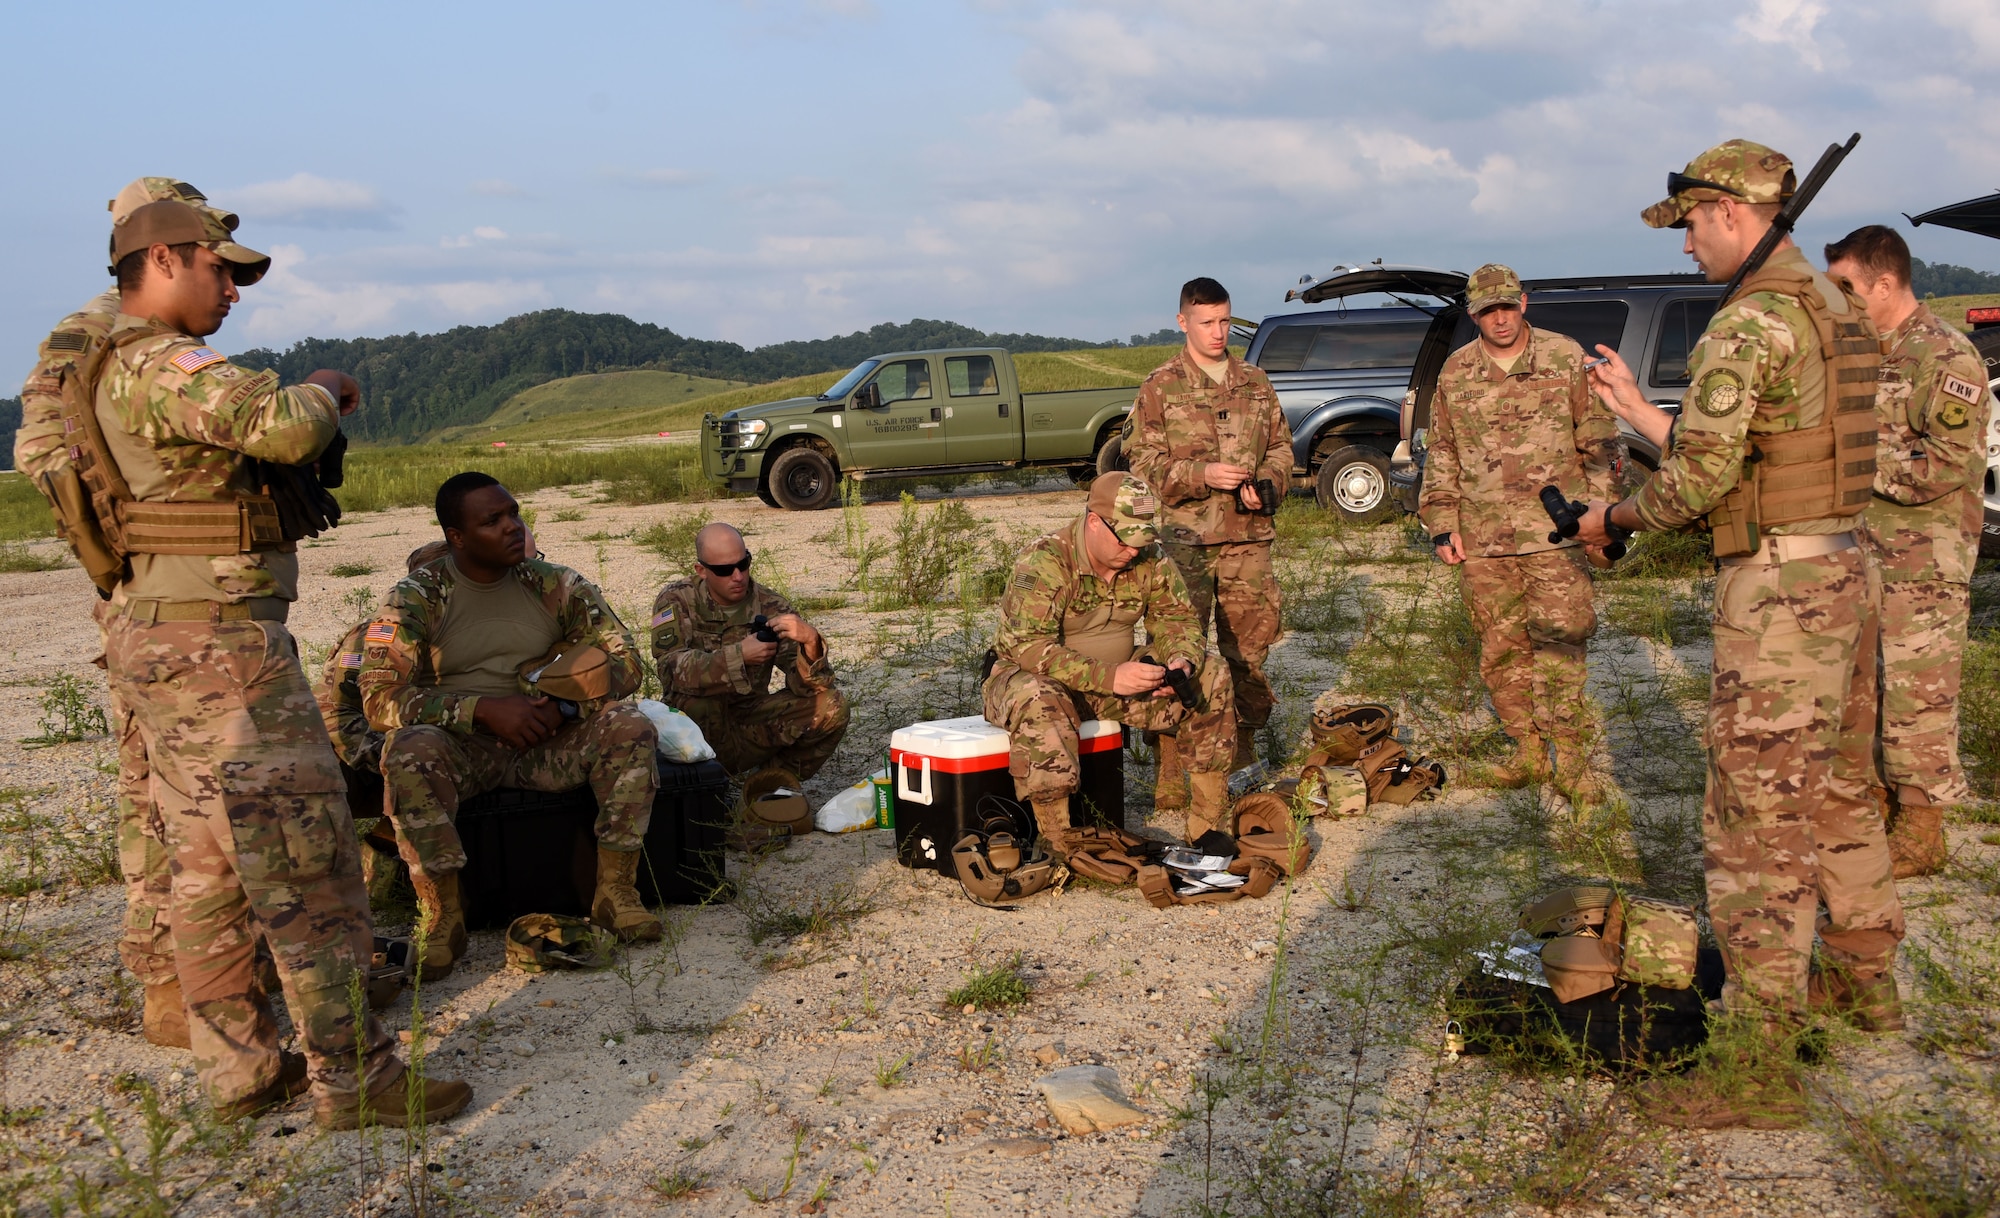 Maj. Allen Jennings, with the 621st Contingency Response Squadron, gives a class on the use of White Phosphor Night Vision Goggles during training at Camp Branch in Logan, West Virginia, Aug. 22, 2018. The 621st CRG spent four days training with and working alongside the 130th ANG at Camp Branch practicing semi-prepared runway operations. (U.S. Air Force photo by Tech. Sgt. Jamie Powell)